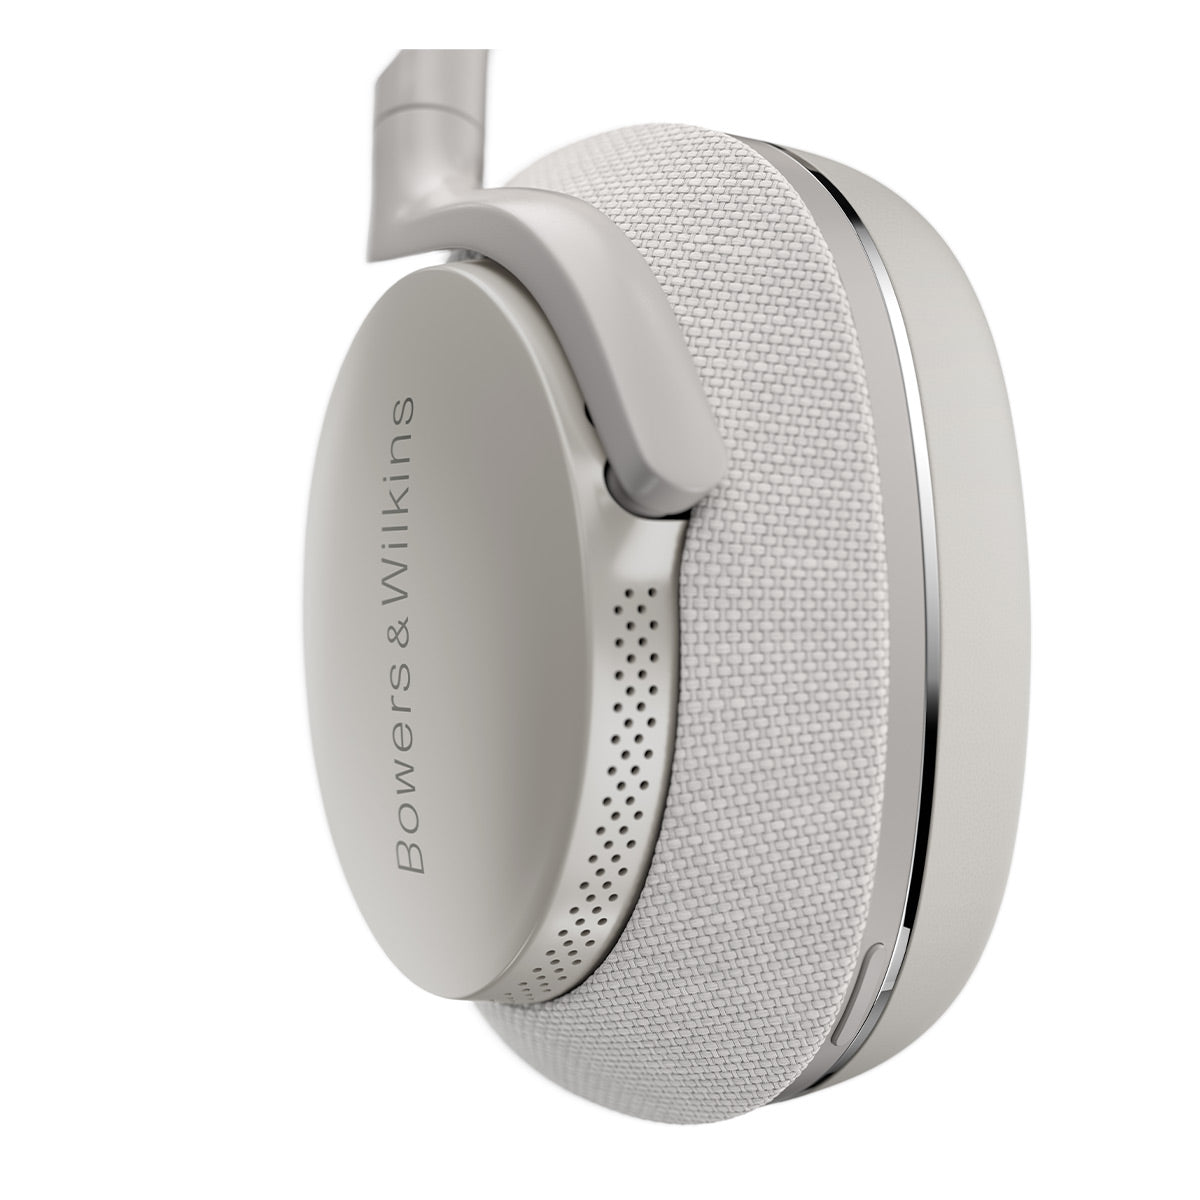 Bowers & Wilkins Px7 S2 Wireless Noise Canceling Bluetooth